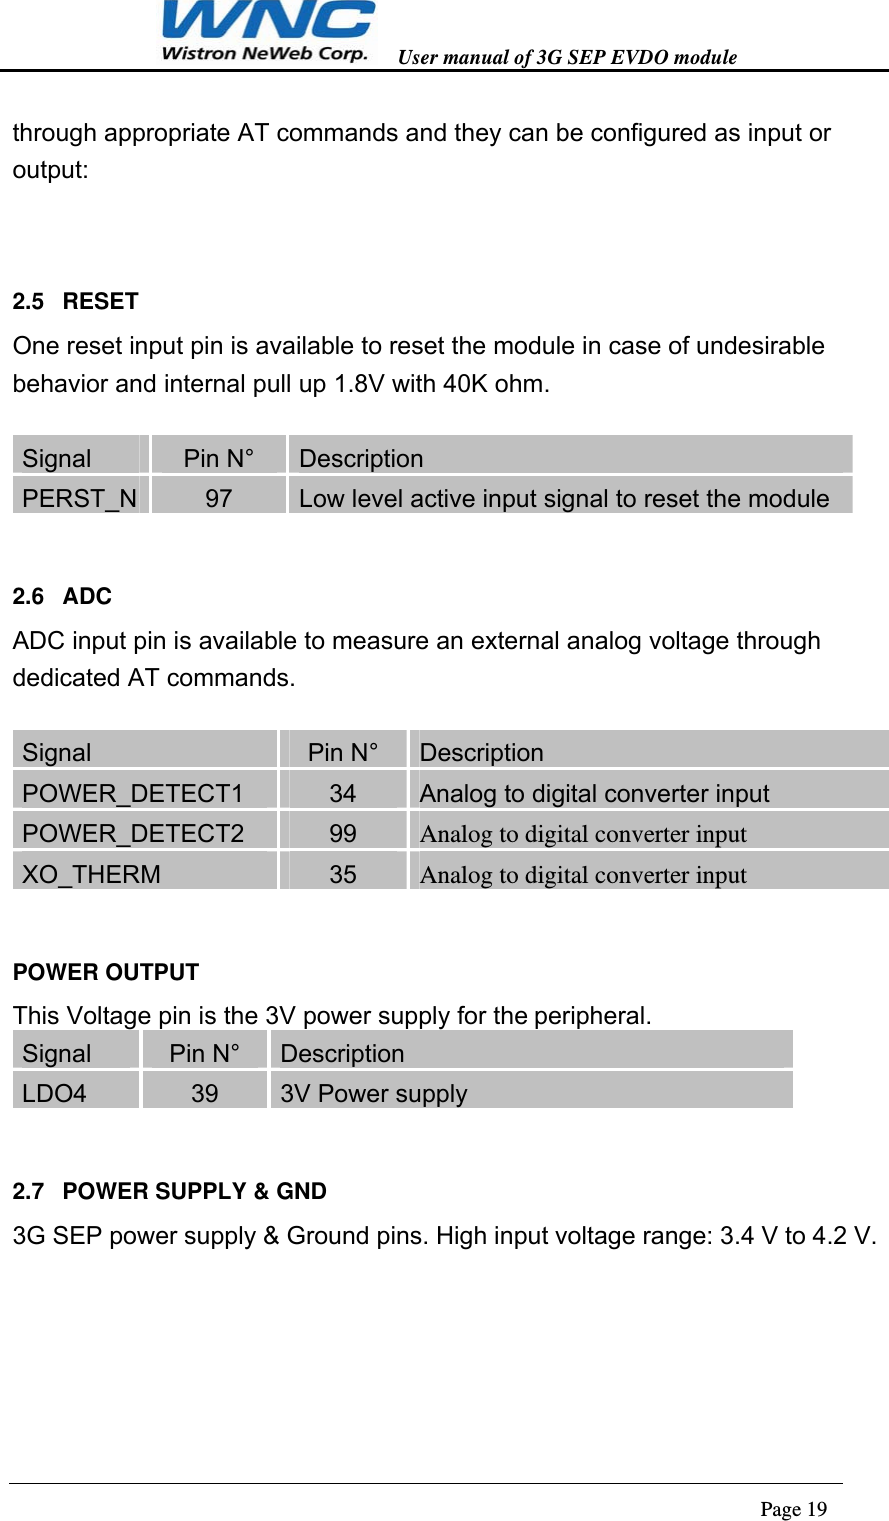   User manual of 3G SEP EVDO module                                                                      Page 19  through appropriate AT commands and they can be configured as input or output:  2.5 RESET One reset input pin is available to reset the module in case of undesirable behavior and internal pull up 1.8V with 40K ohm.  Signal  Pin N°  Description PERST_N  97  Low level active input signal to reset the module 2.6 ADC ADC input pin is available to measure an external analog voltage through dedicated AT commands.  Signal  Pin N°  Description POWER_DETECT1  34  Analog to digital converter input POWER_DETECT2  99  Analog to digital converter input XO_THERM  35  Analog to digital converter input POWER OUTPUT This Voltage pin is the 3V power supply for the peripheral.  Signal  Pin N°  Description LDO4  39  3V Power supply 2.7  POWER SUPPLY &amp; GND 3G SEP power supply &amp; Ground pins. High input voltage range: 3.4 V to 4.2 V.  